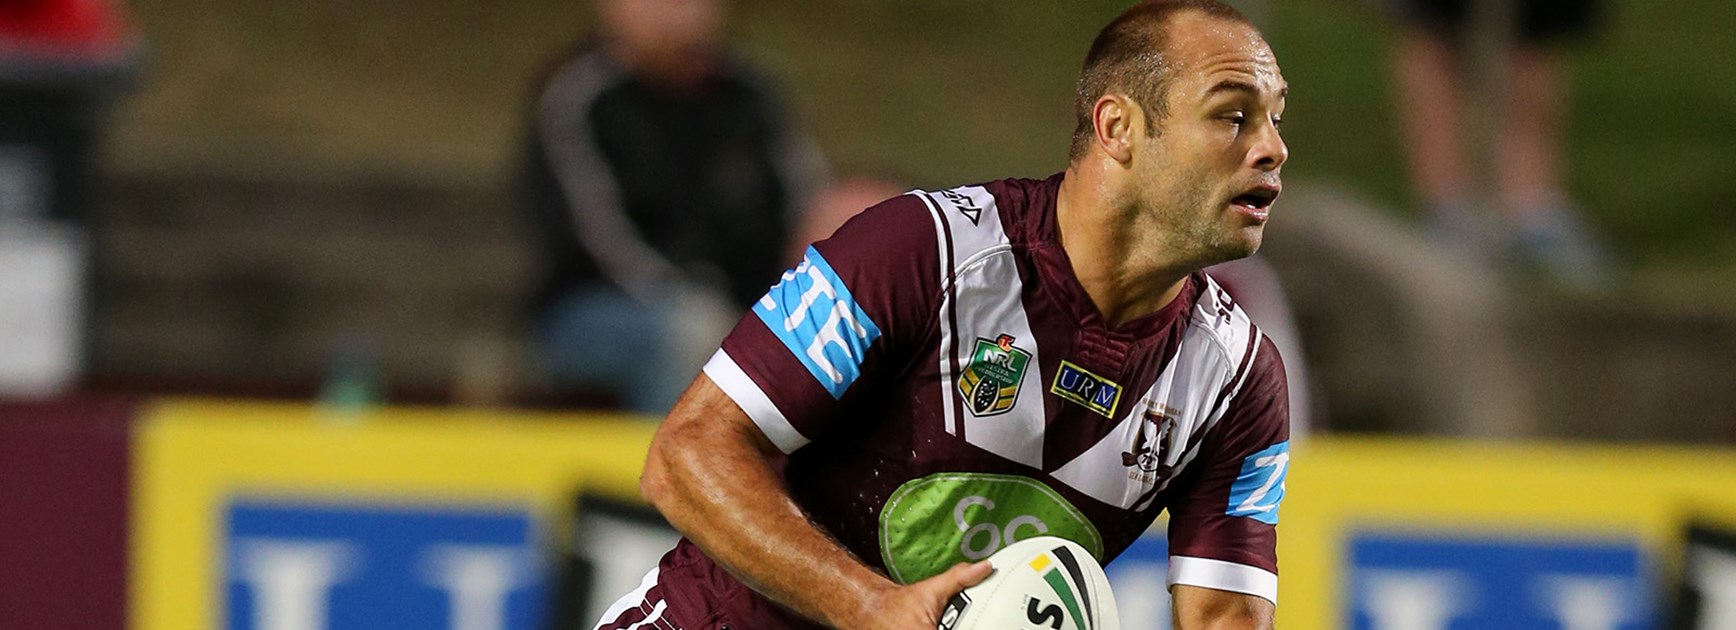 Brett Stewart played his first game of the season in Round 3 against the Sharks.